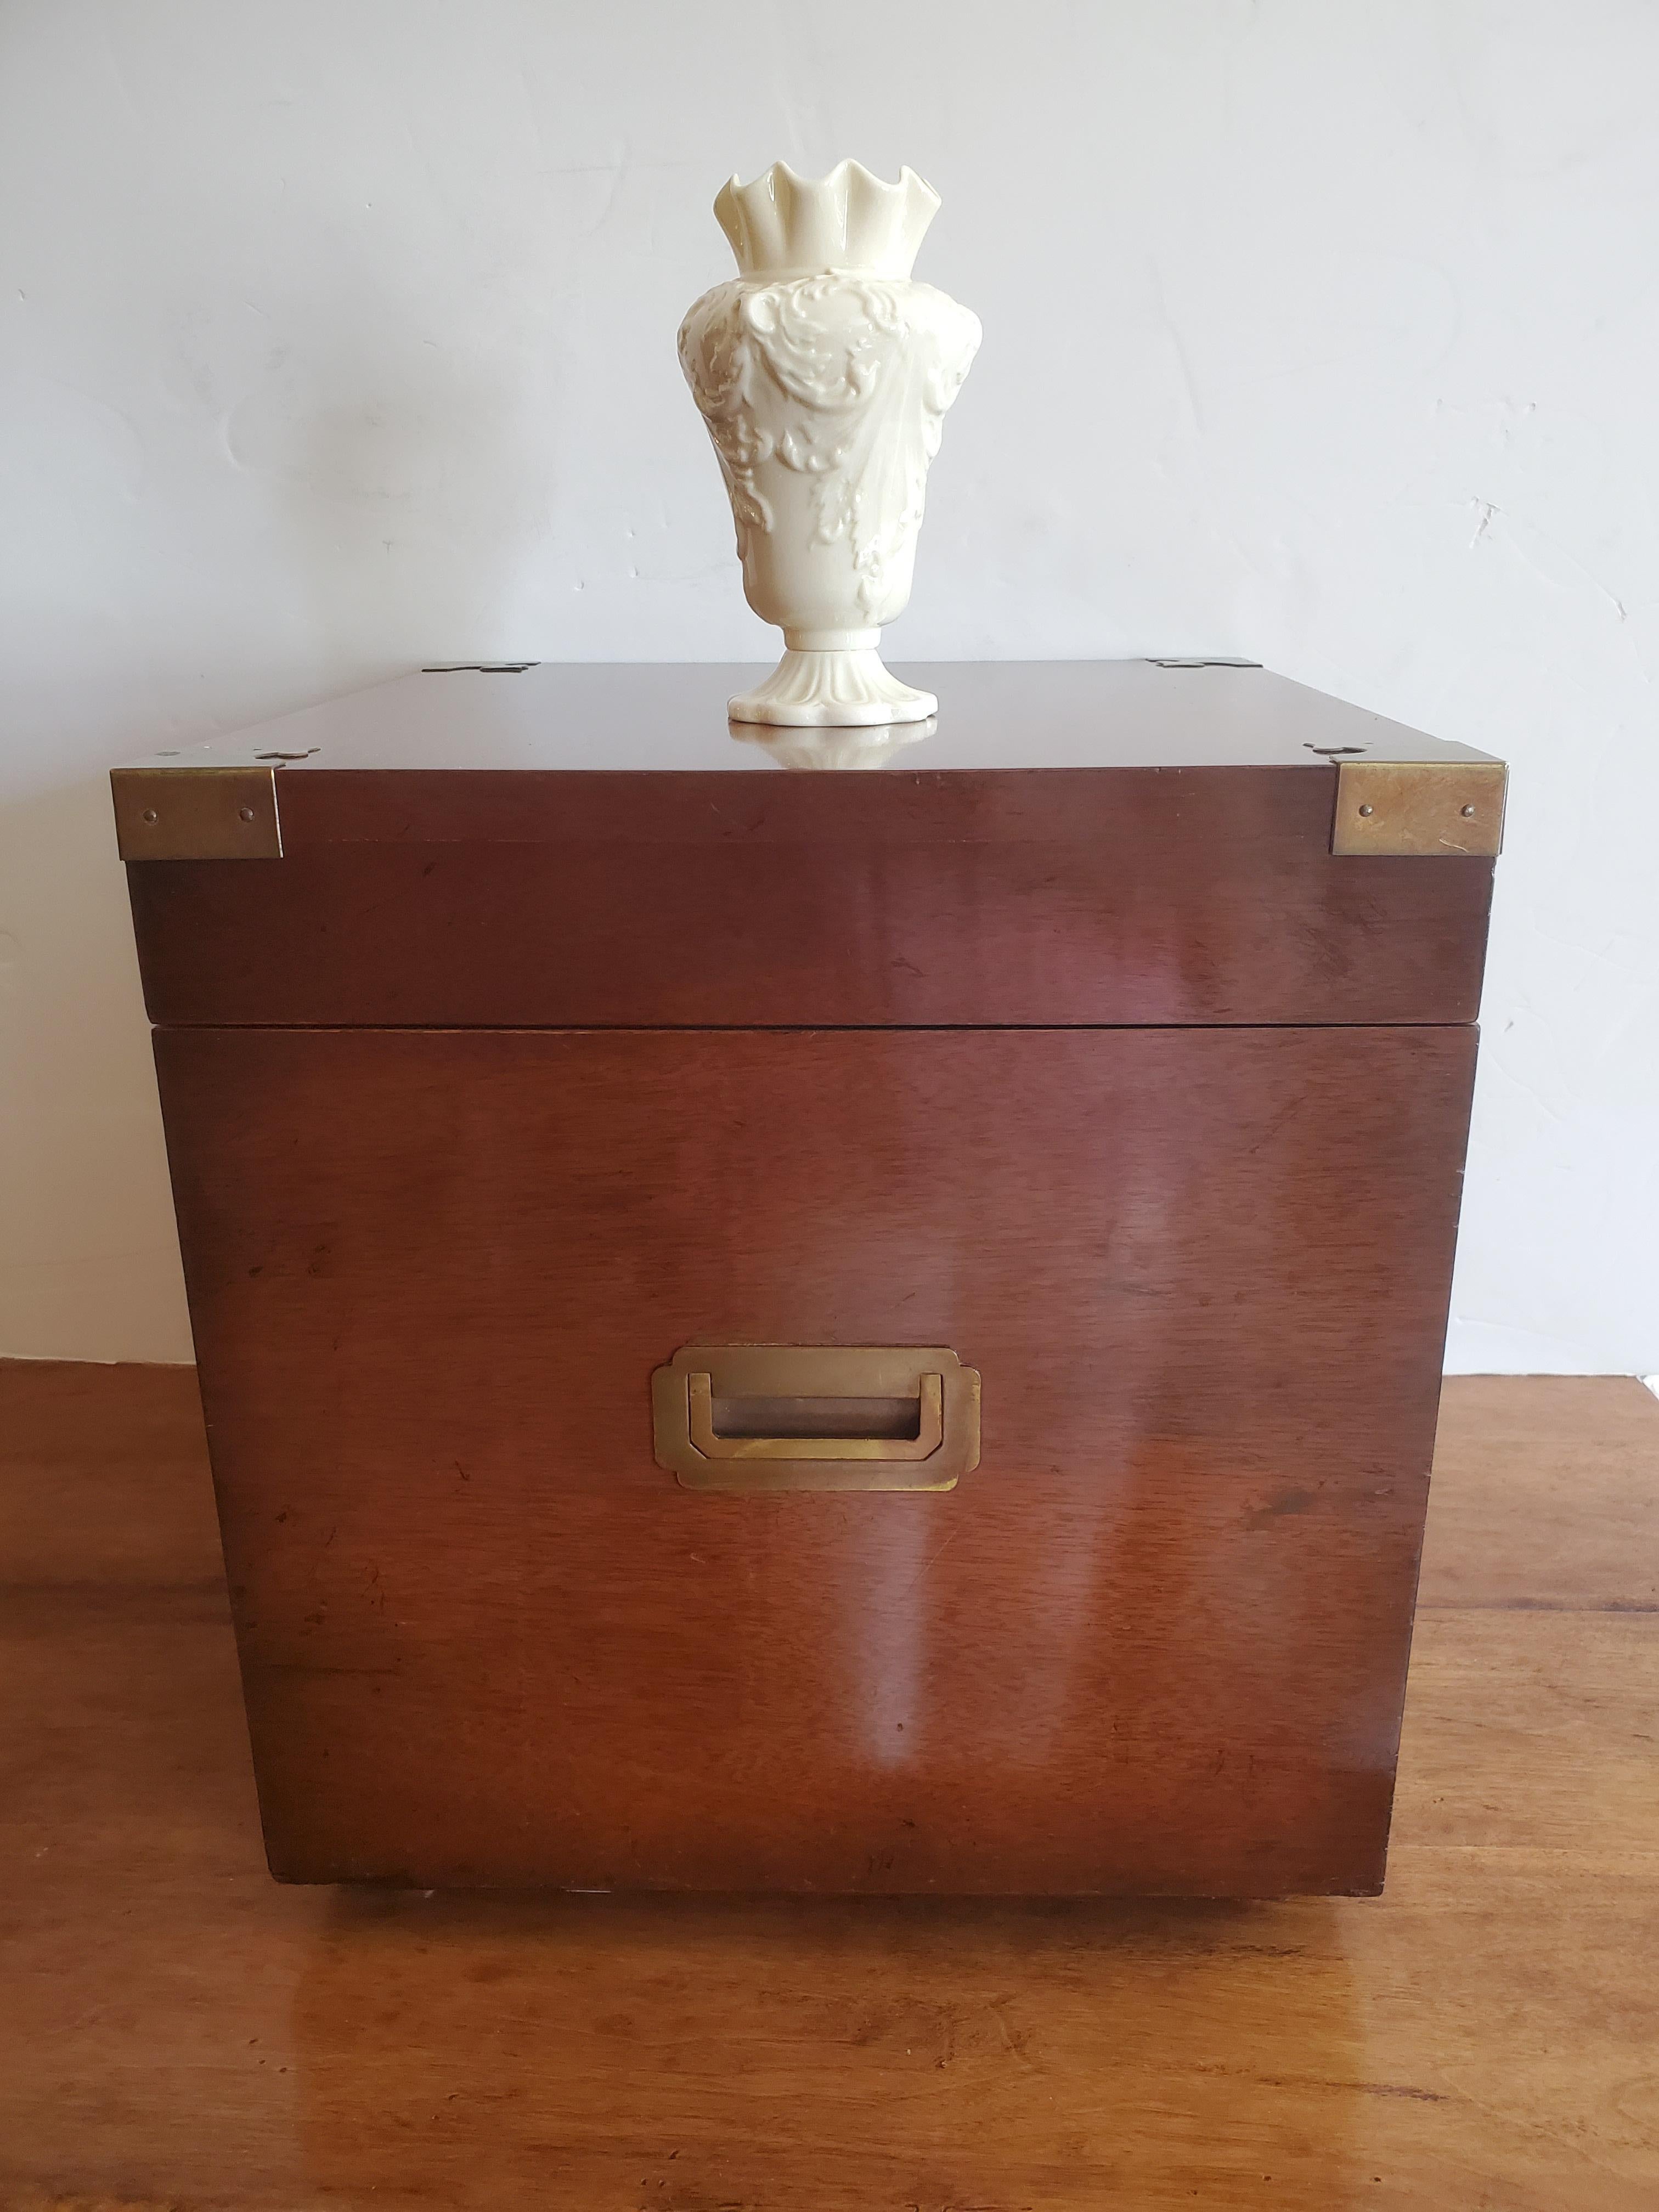 Very handsome multi functional square cube mahogany trunk having gorgeous brass decorative corners on top and side recesssed brass handles. The top lifts up to reveal storage inside. A great size for use as a side or end table.